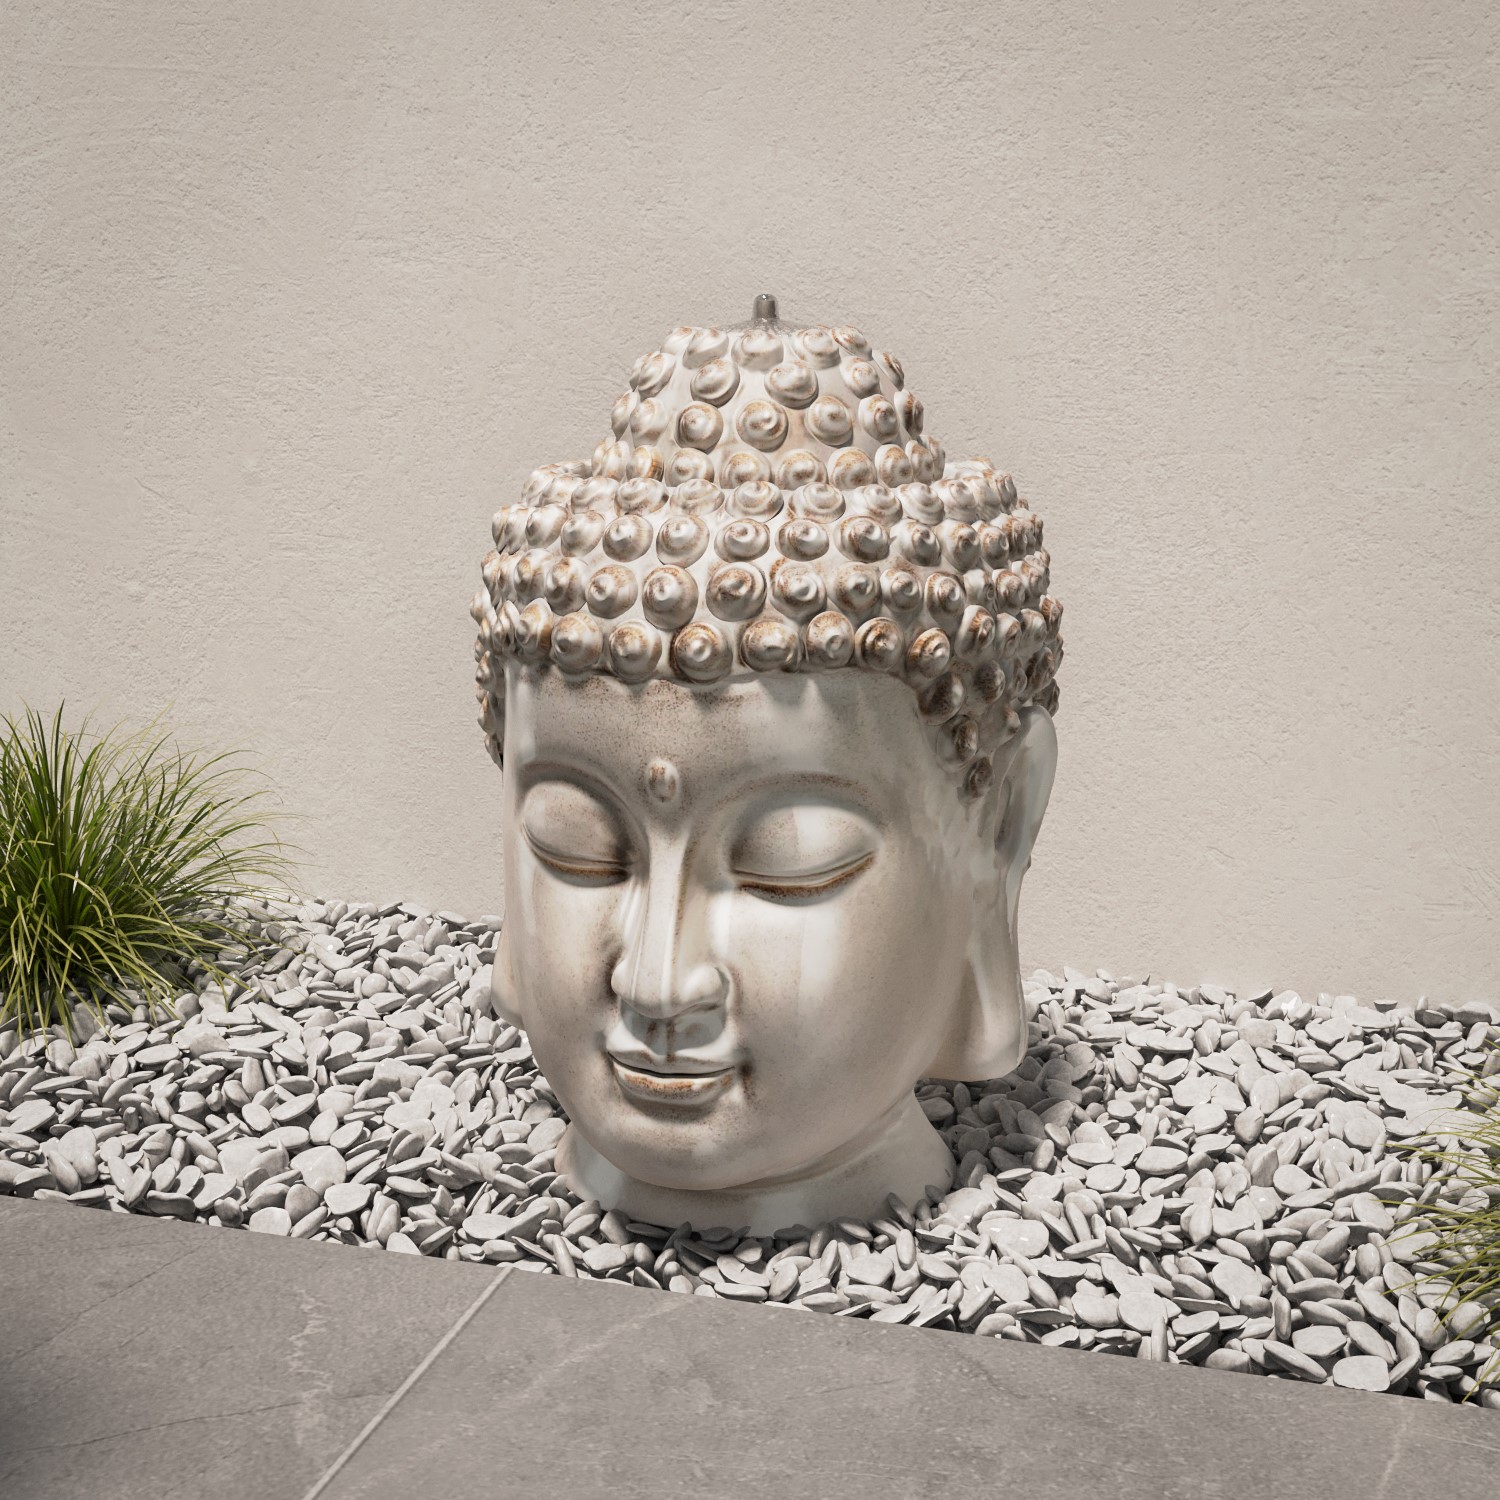 Read more about Ceramic buddha head water feature with led lights